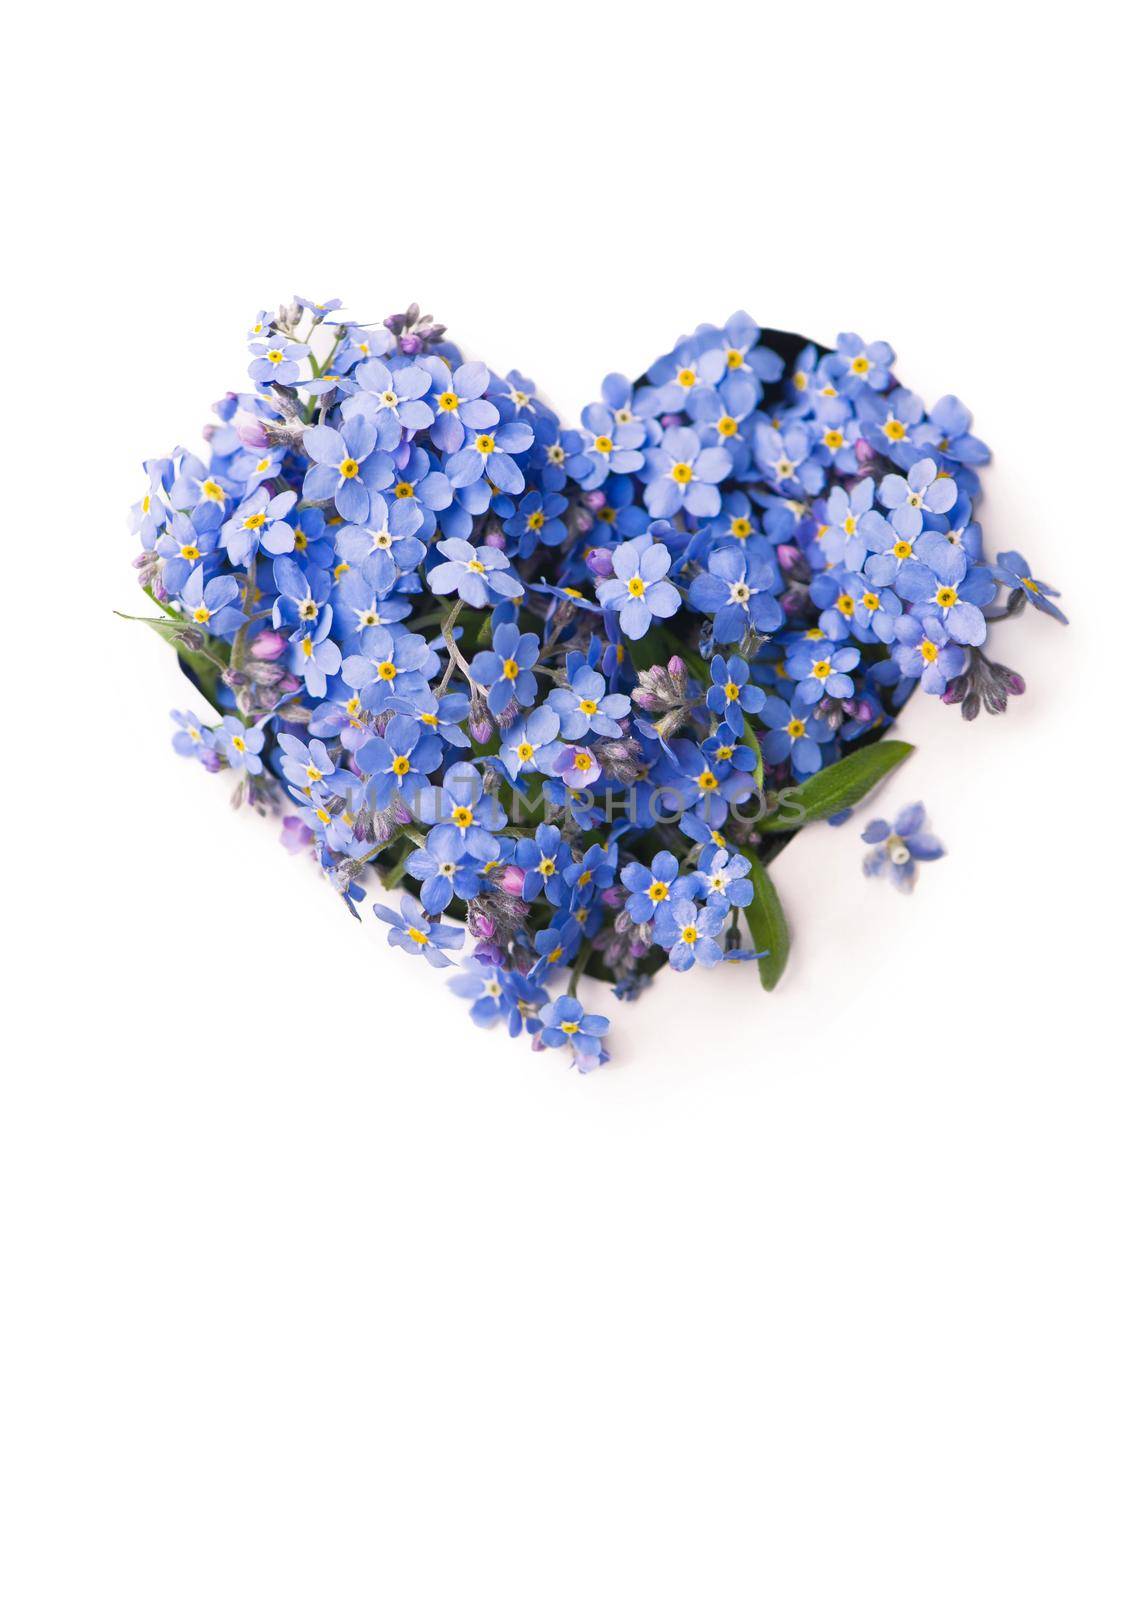 Forget me not, little flowers in heart shape, isolated on white